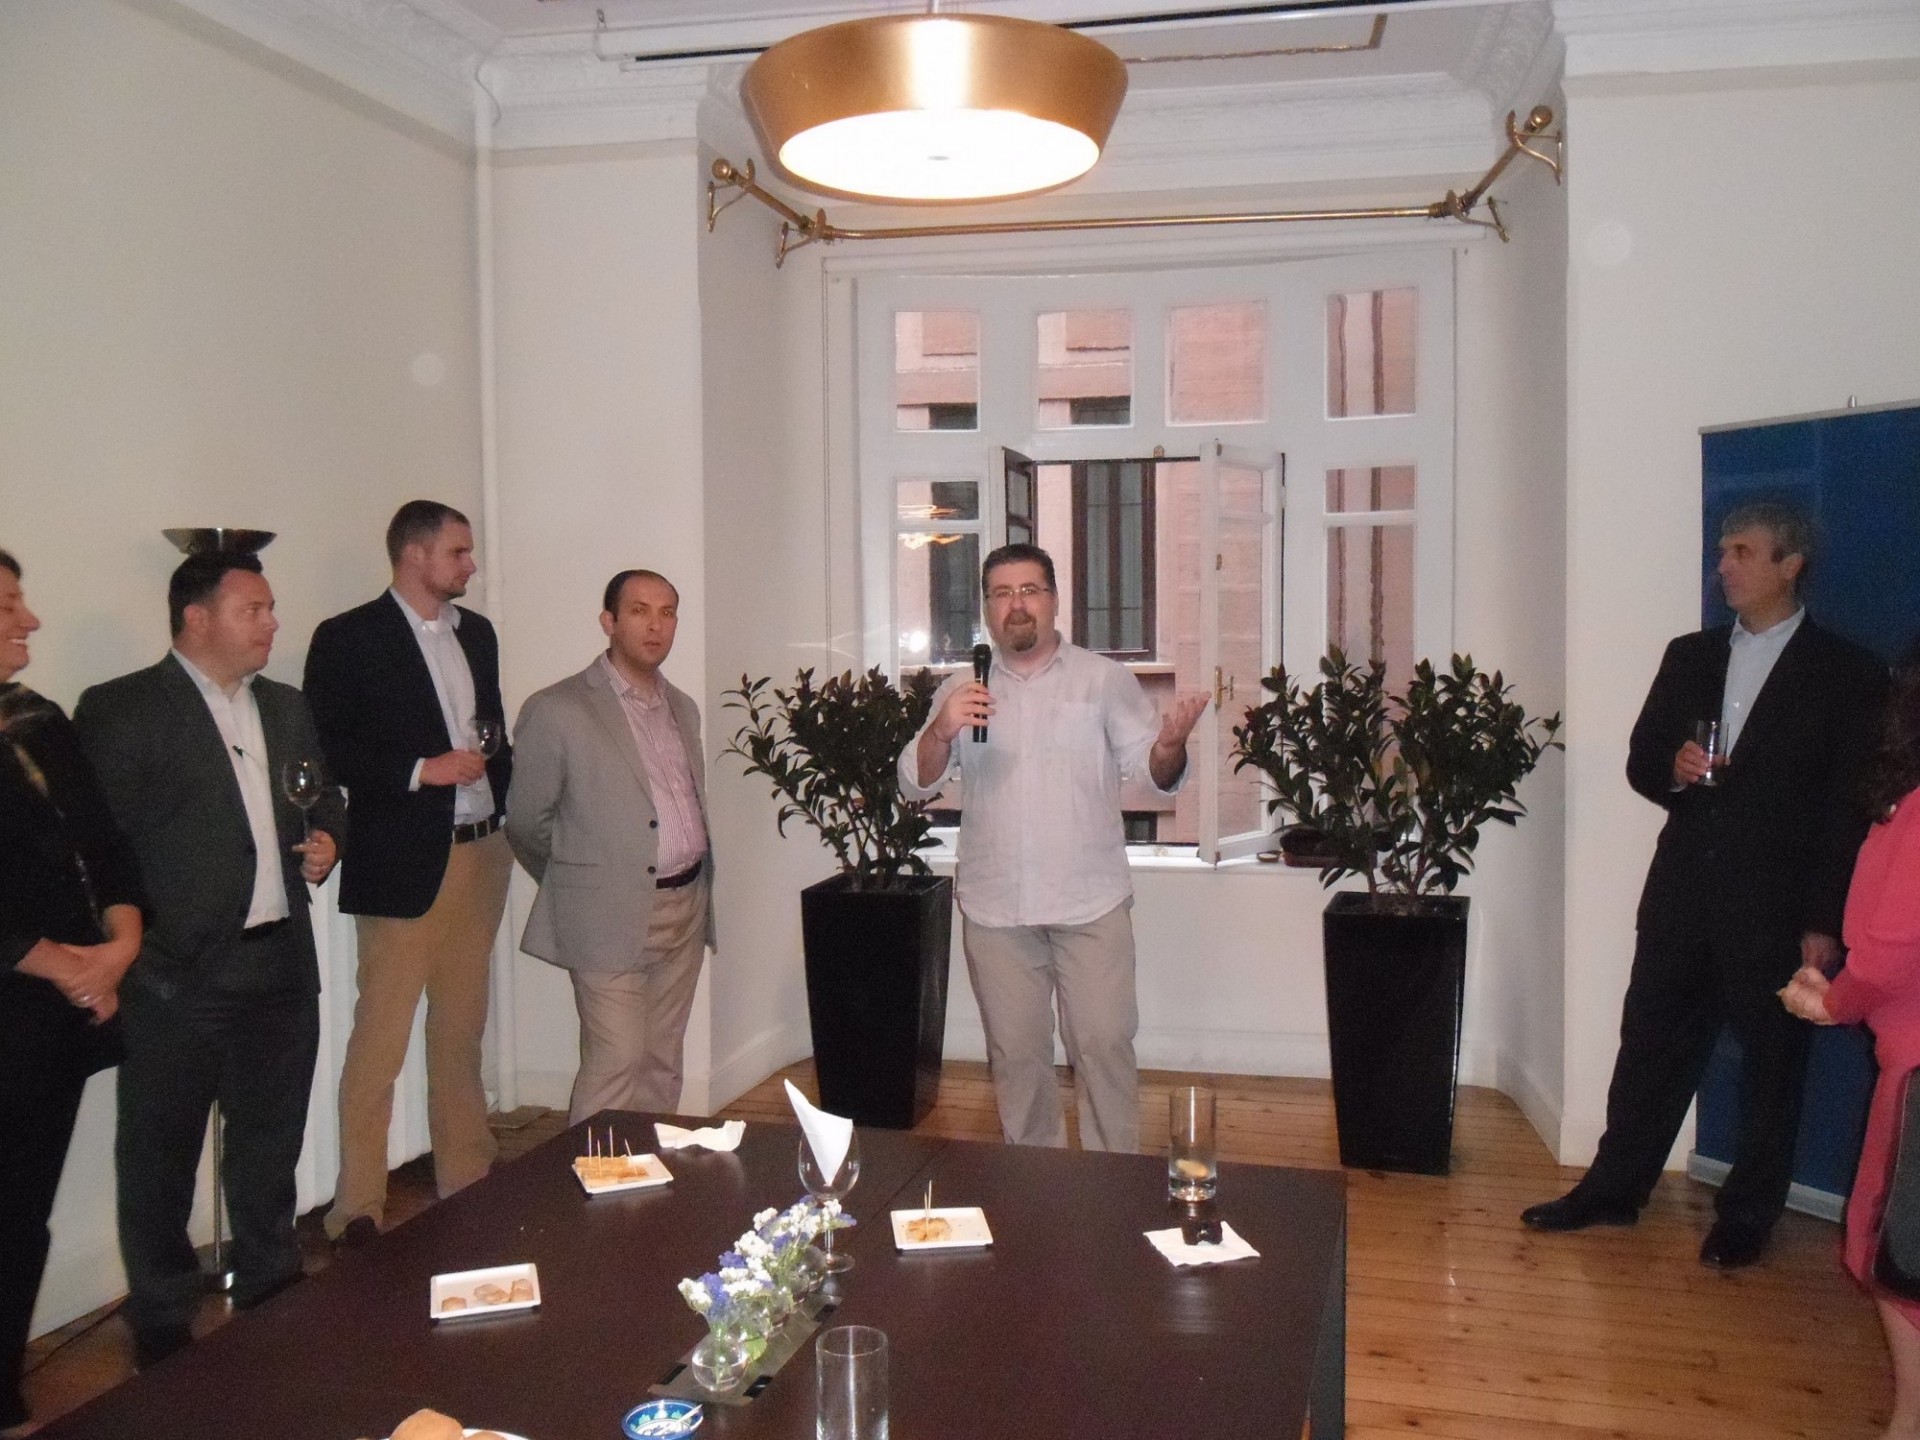 Columbia Business School Executive MBA Trip and Reception